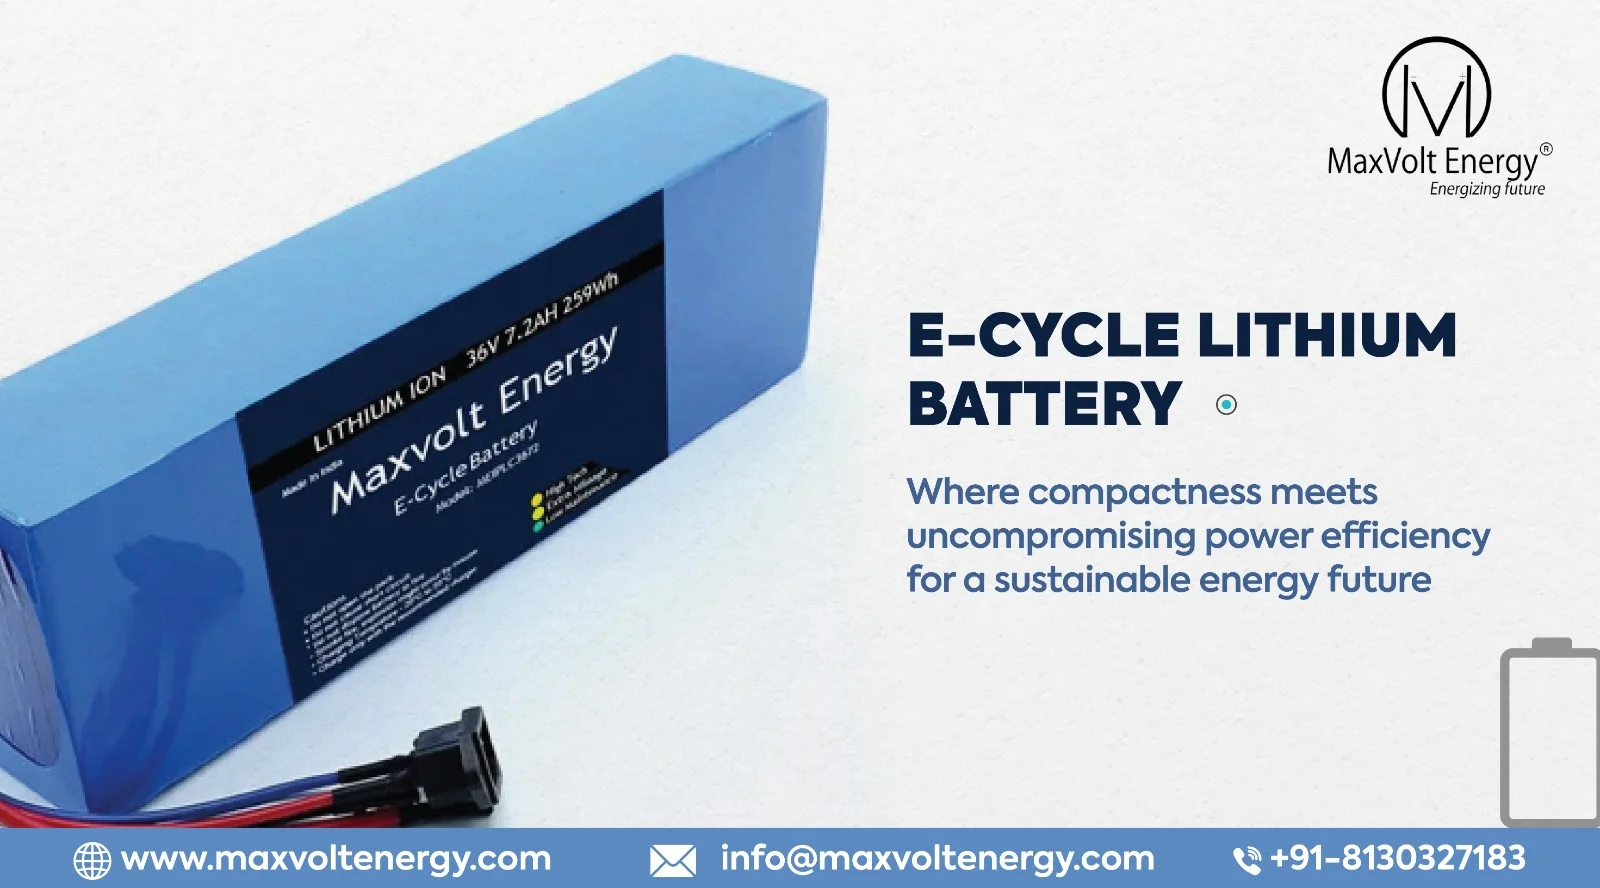 Small Package, Big Power: The Compact Efficiency of E-Cycle Lithium Batteries